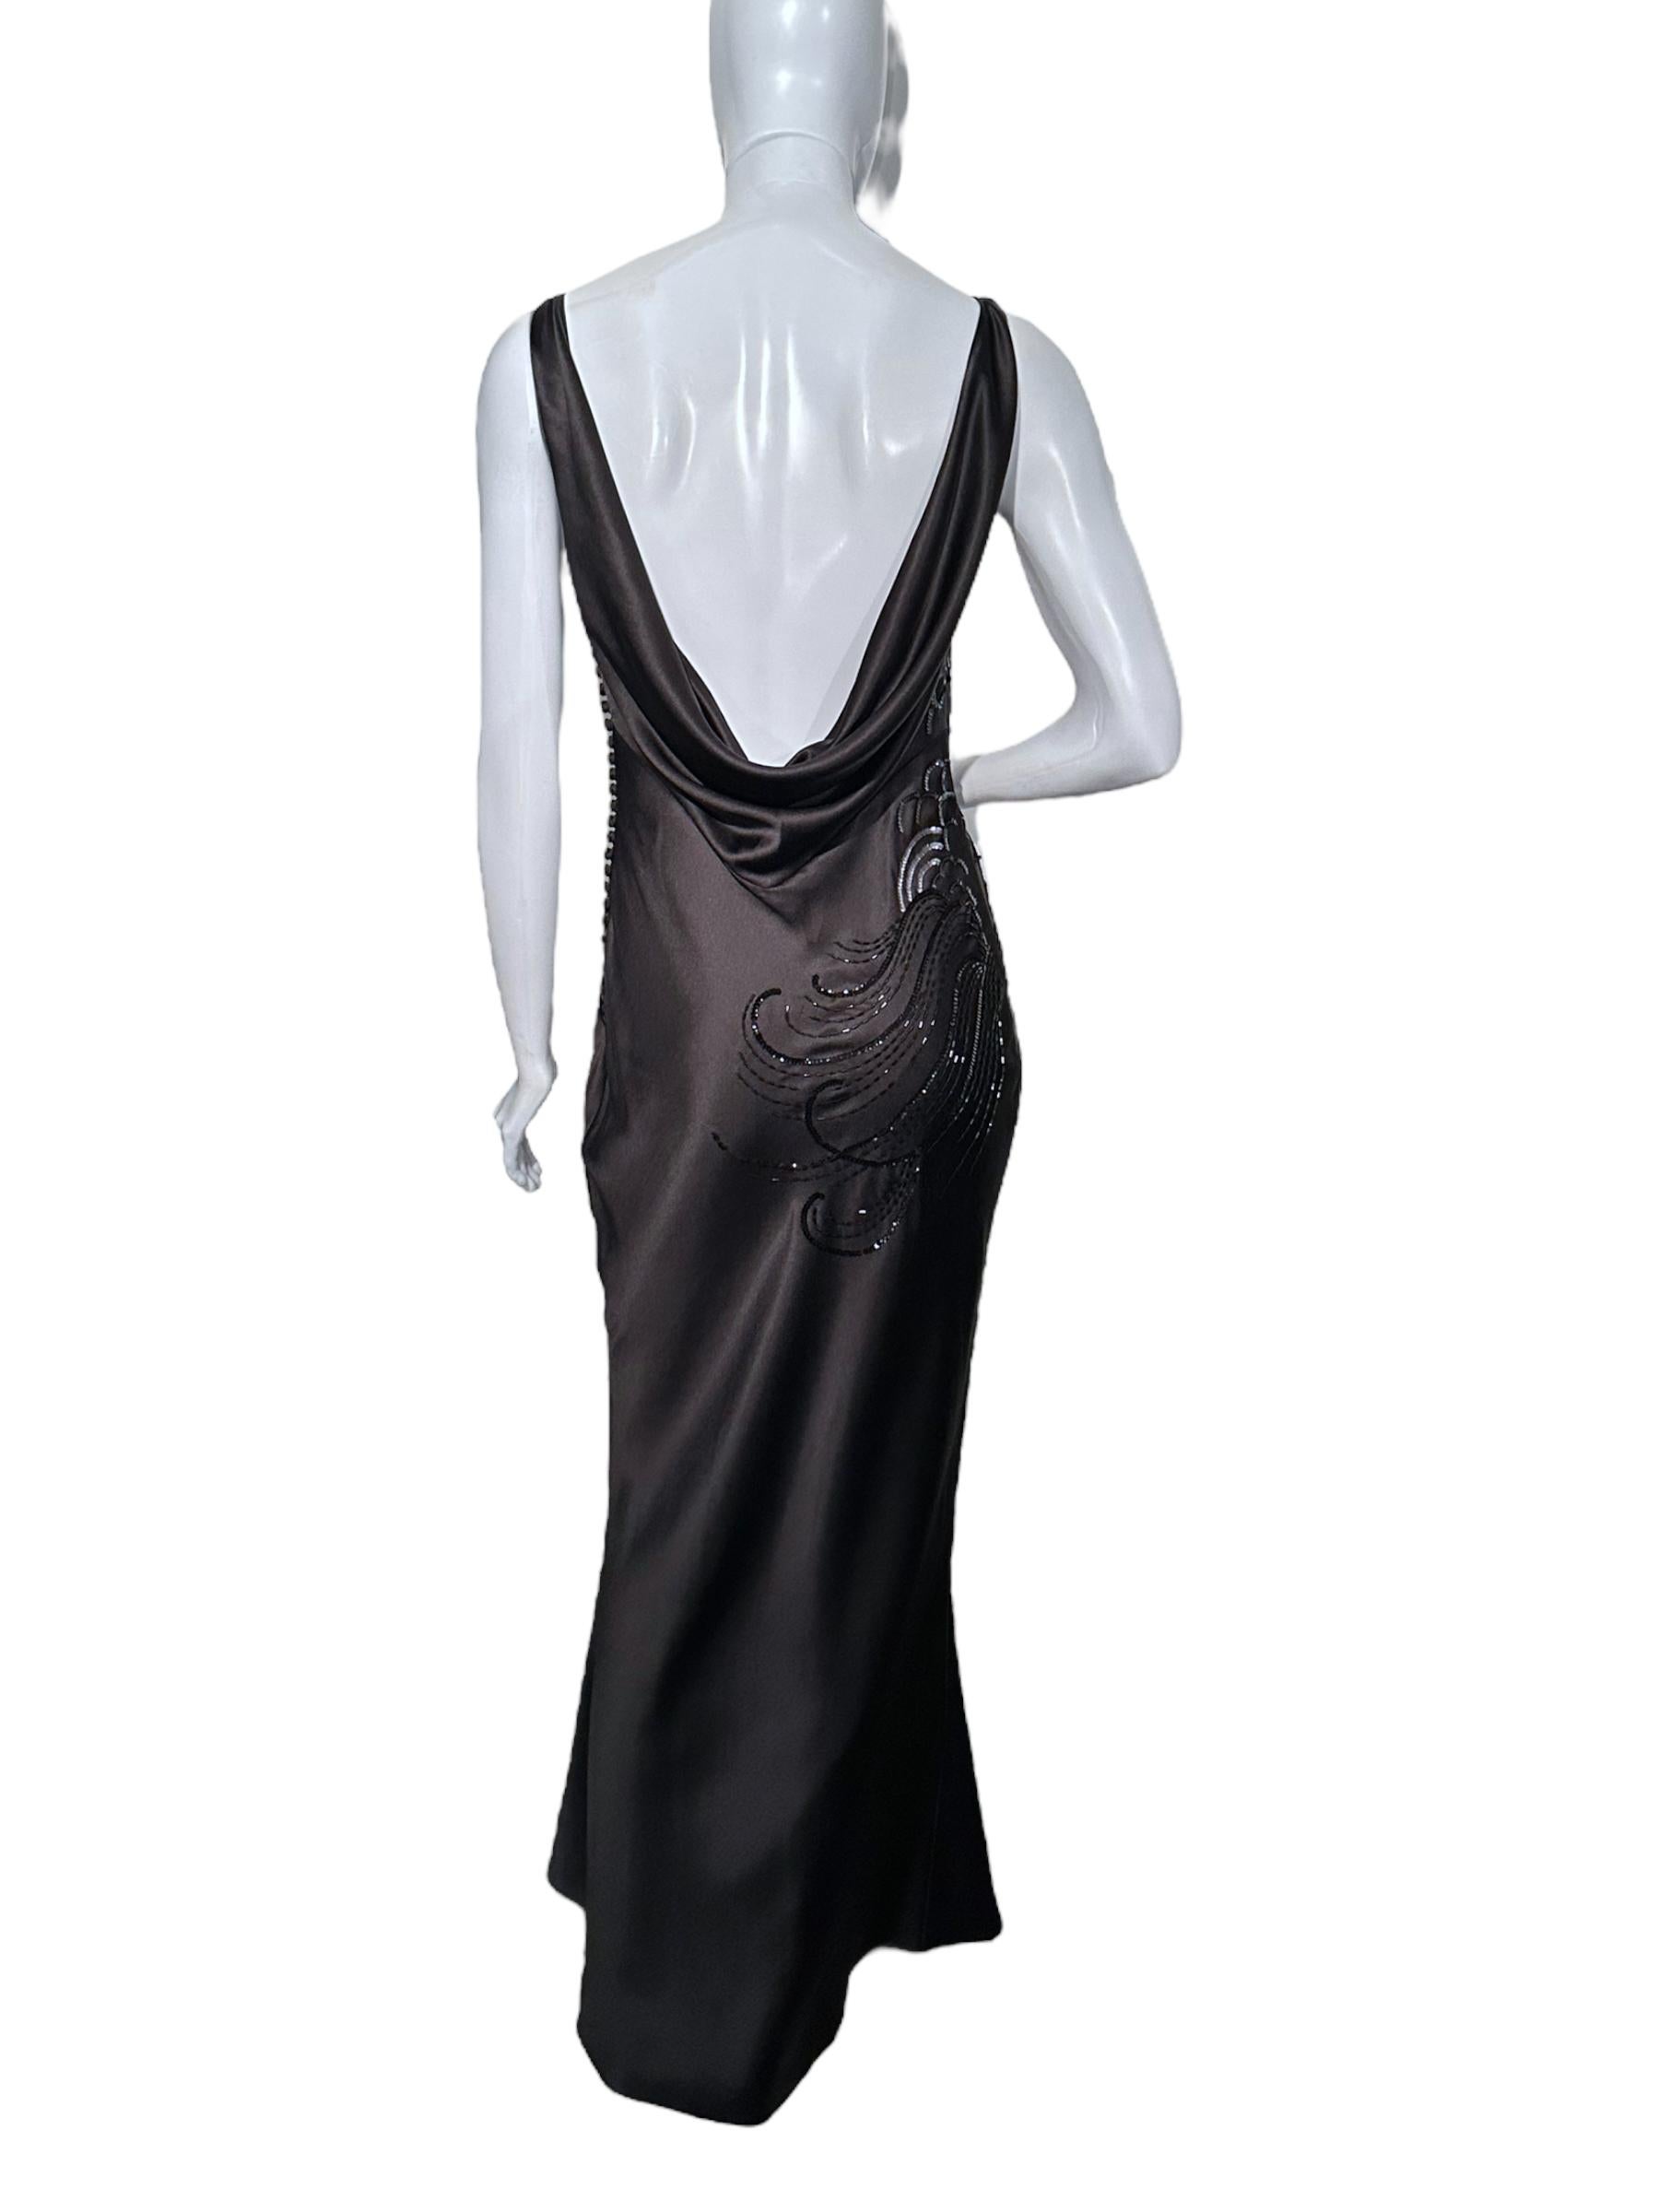 Iconic Christian Dior By John Galliano Ss 2005 Beaded Bodice Black Gown In Good Condition For Sale In São Paulo, SP